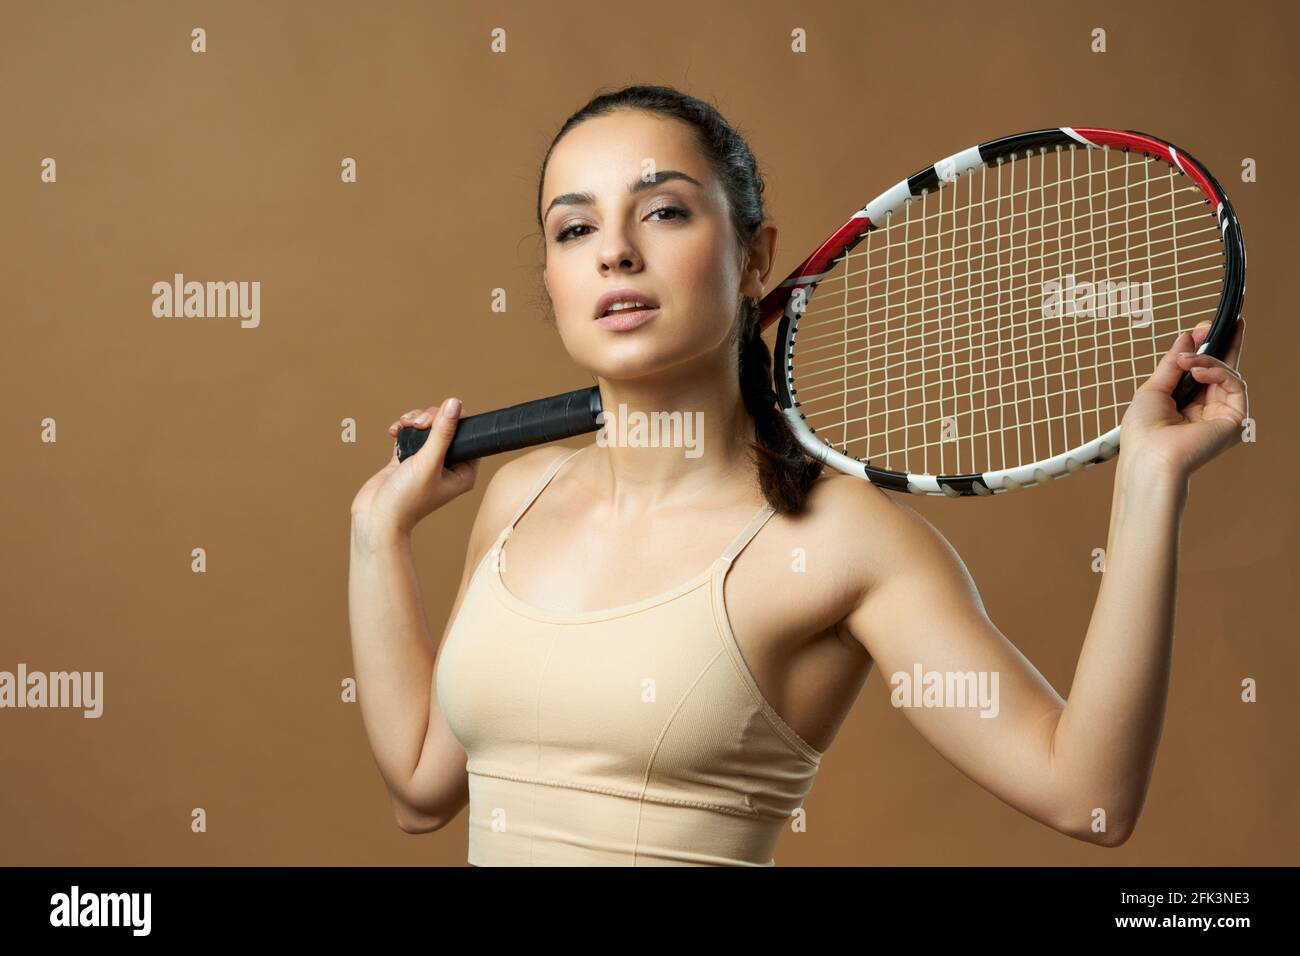 Charming young woman with tennis racket posing in studio Stock Photo